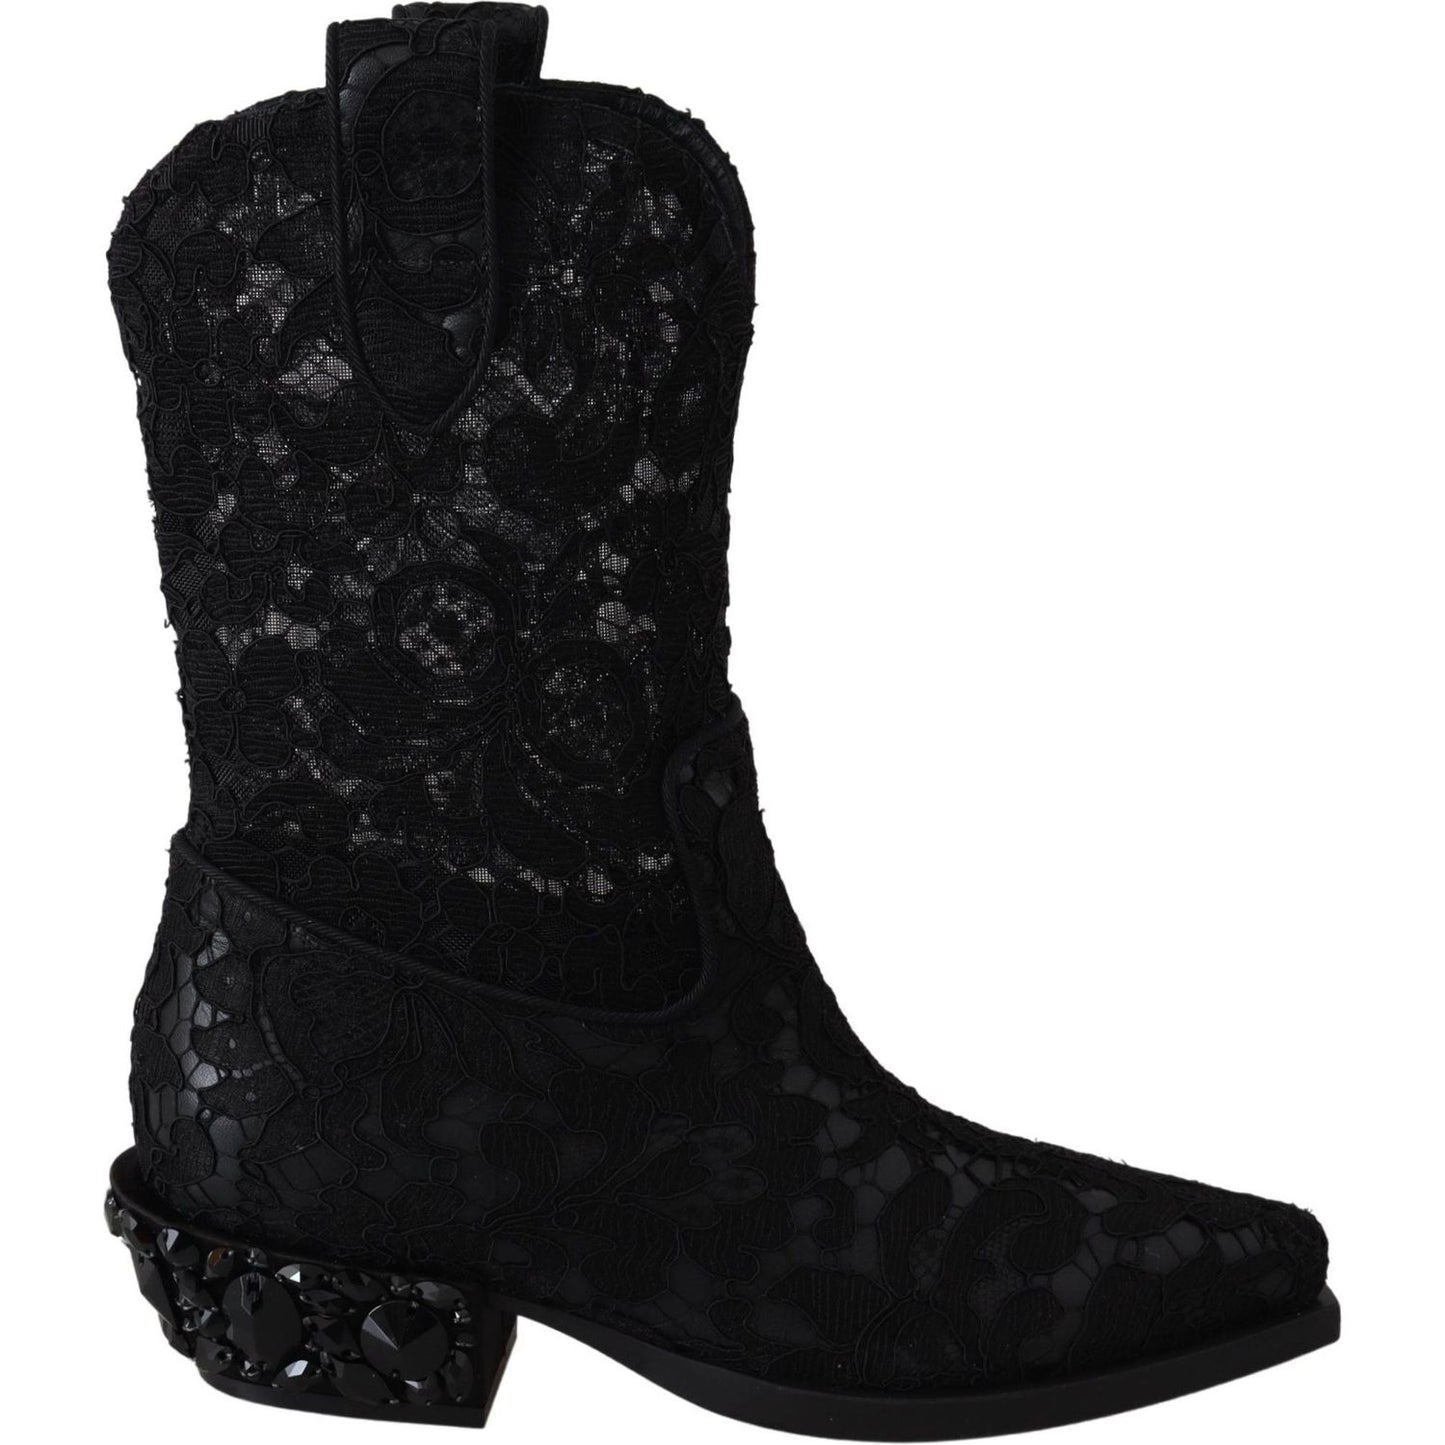 Dolce & Gabbana Elegant Viscose Leather Ankle Boots with Crystals black-lace-taormina-ankle-cowboy-crystal-shoes